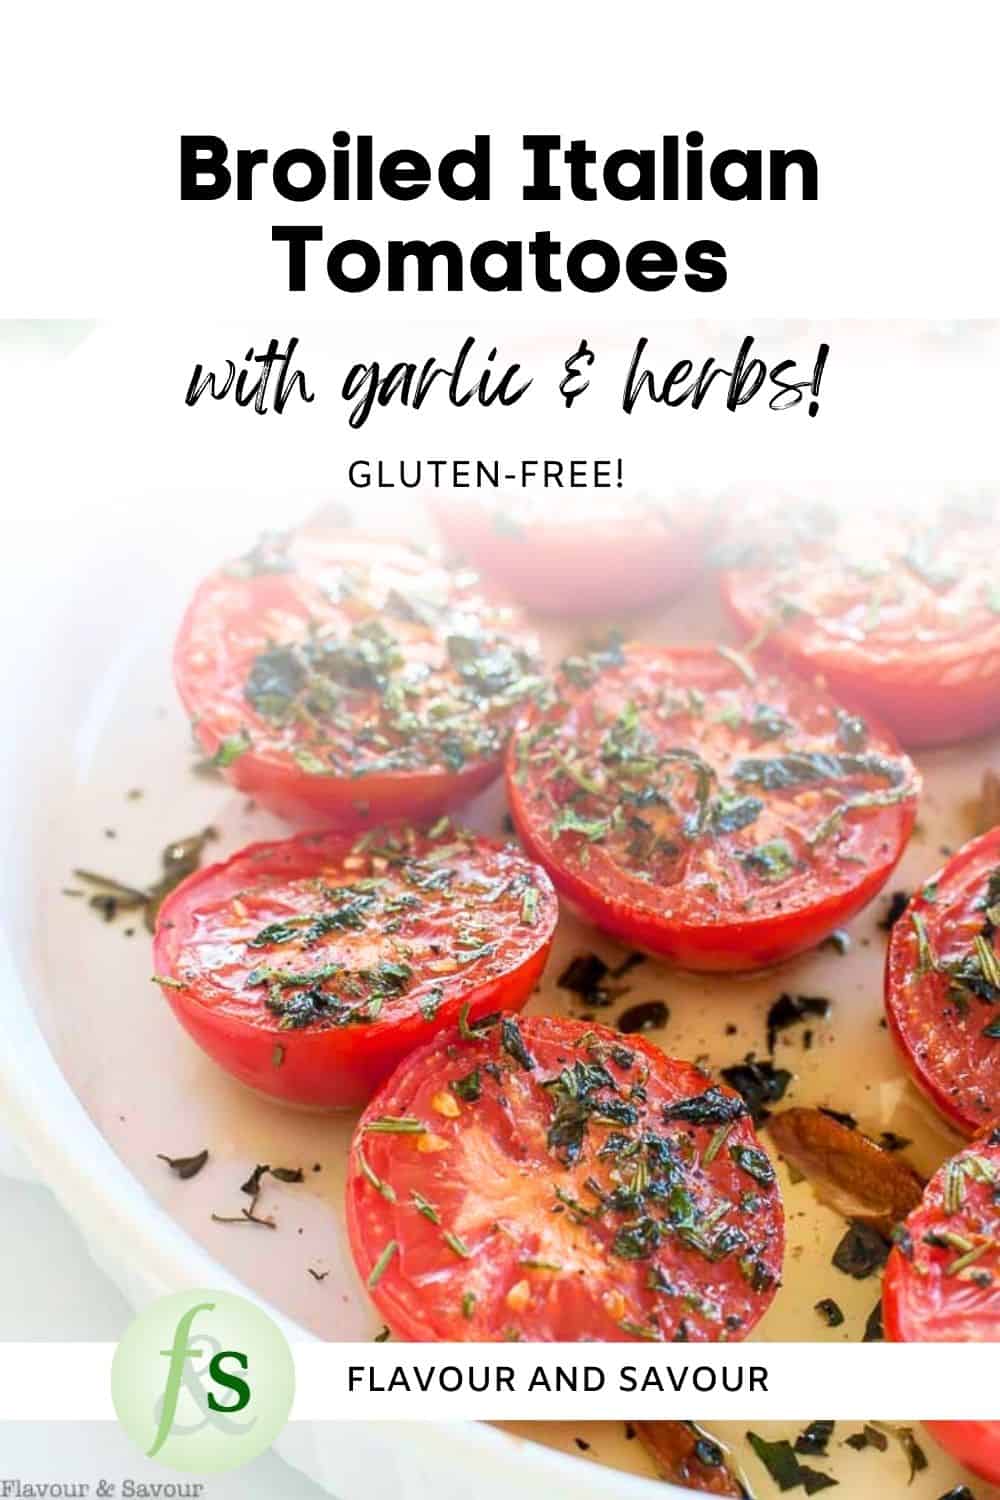 Broiled Italian tomatoes with garlic and herbs image with text overlay.